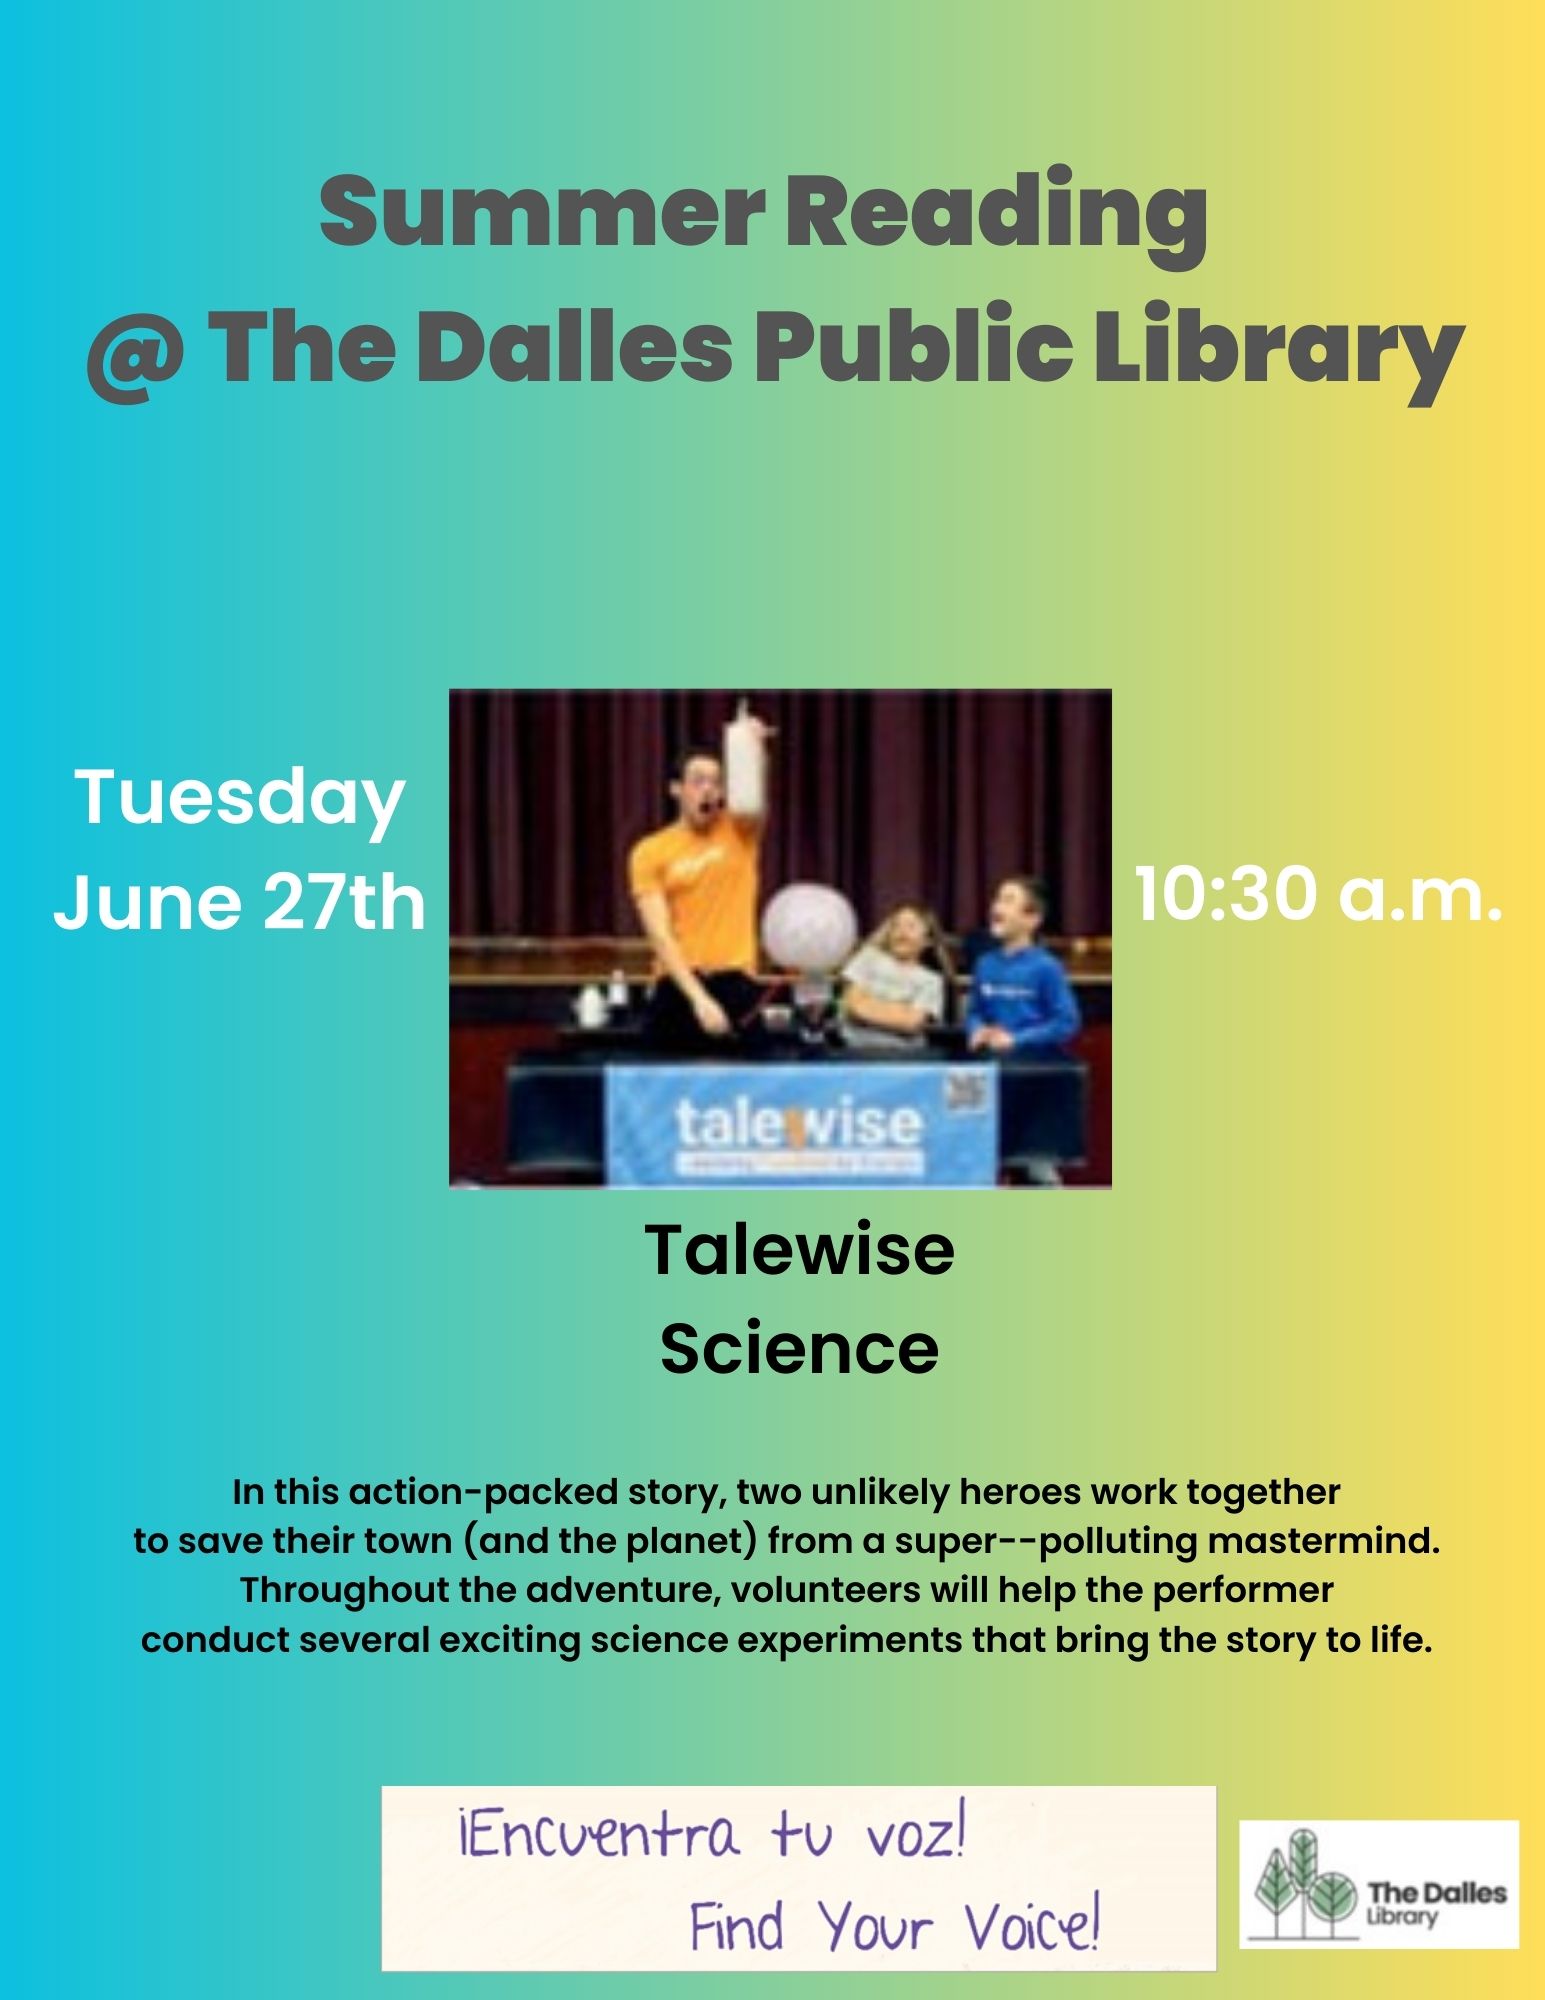 Summer Reading event - Talewise Science